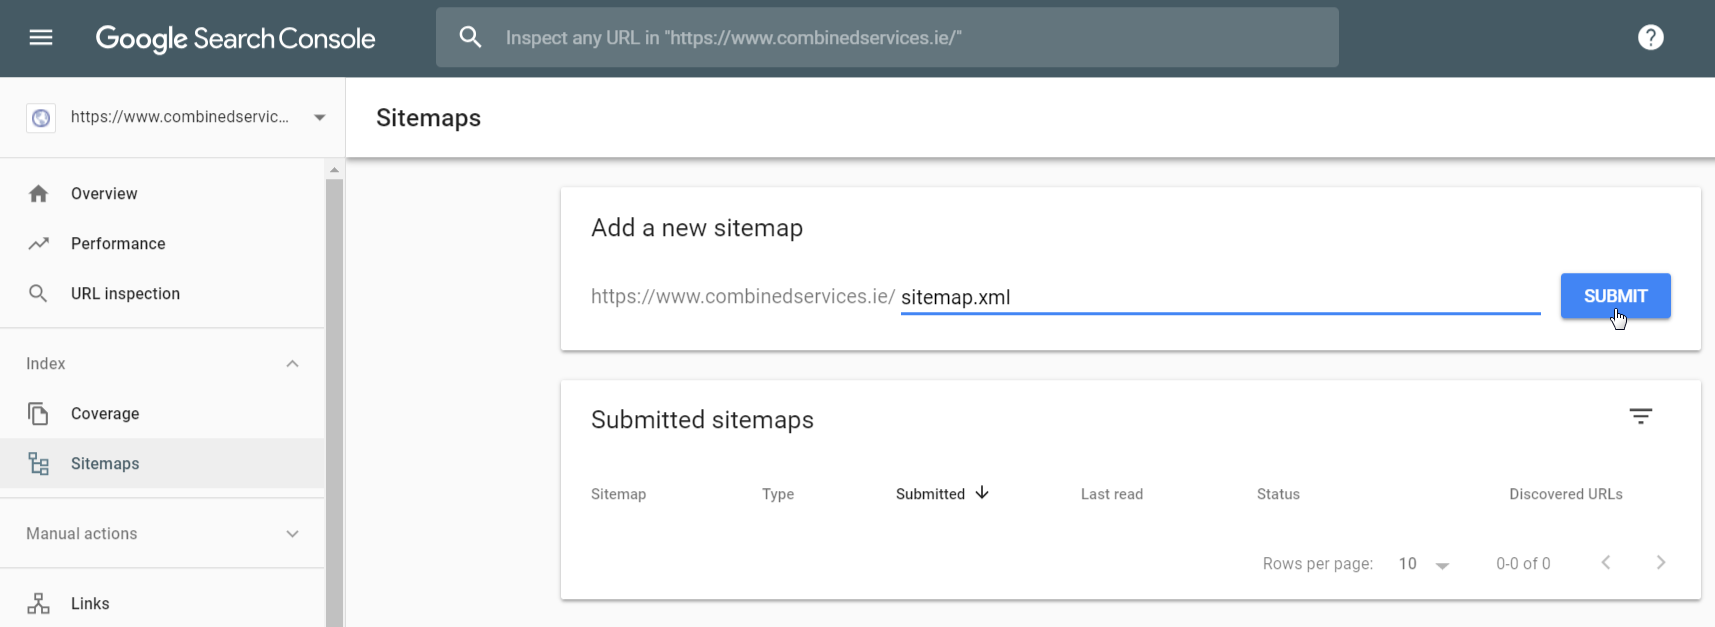 .xml sitemap submitted on Google Search Console